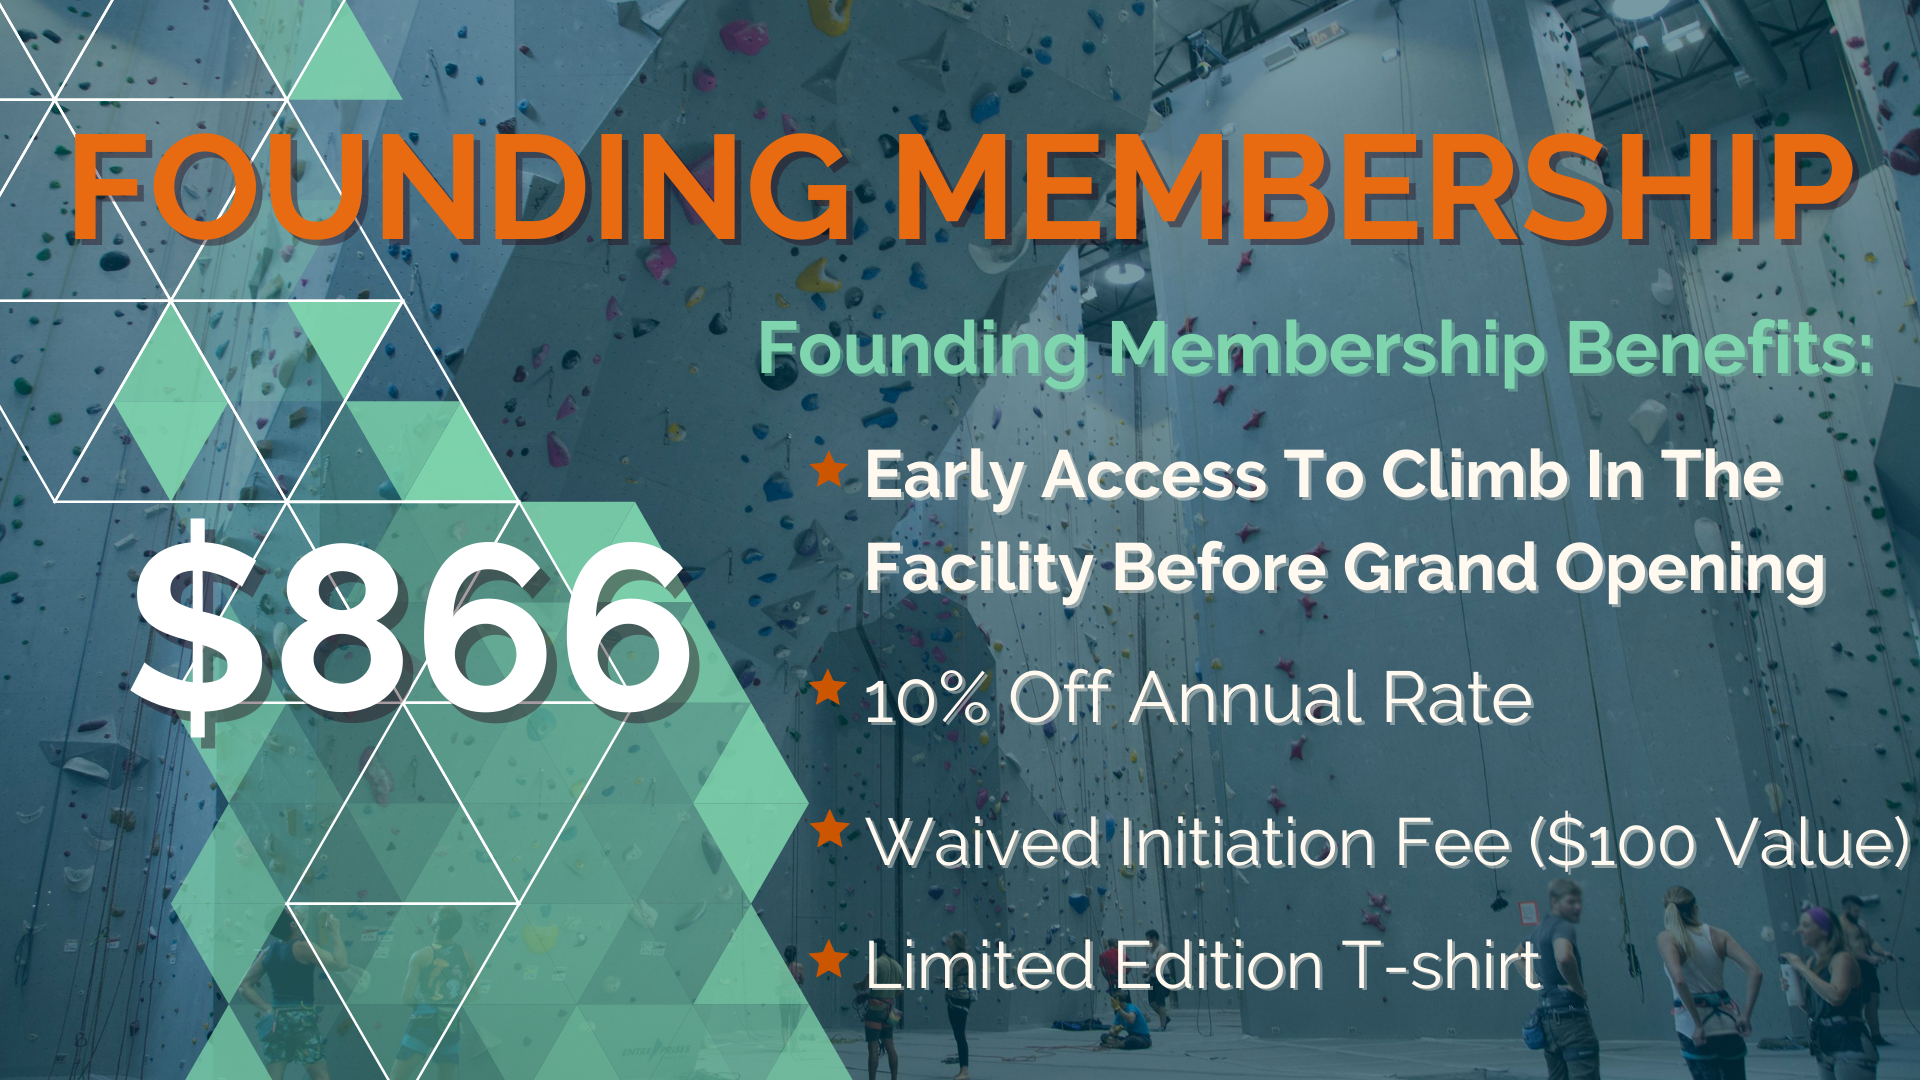 Sign-up for a Founding Membership